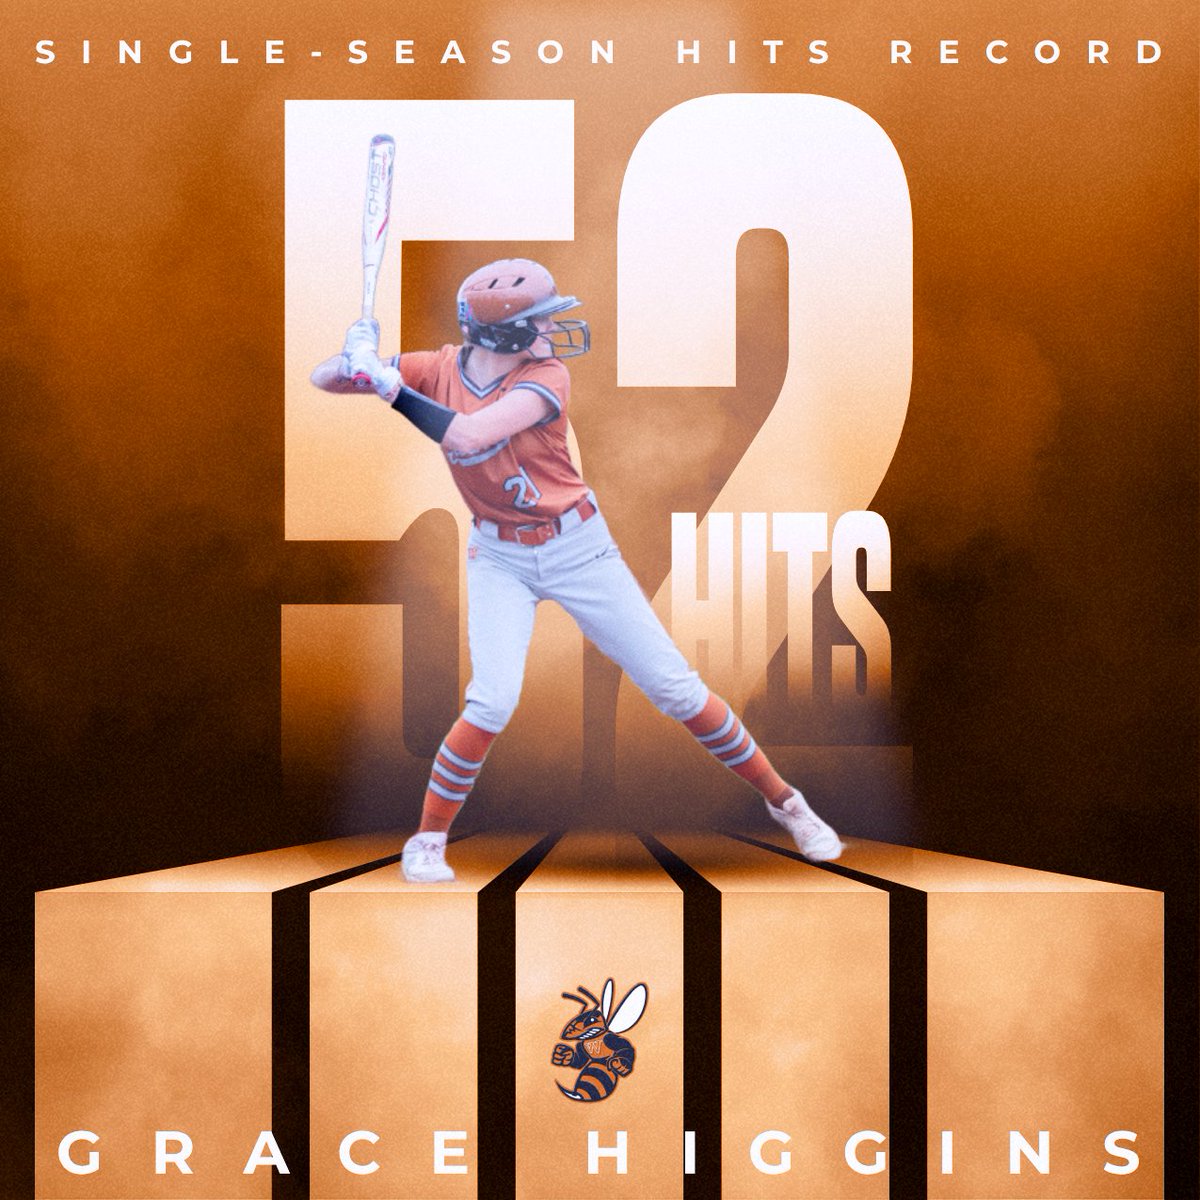 🥎 𝗦𝗜𝗡𝗚𝗟𝗘-𝗦𝗘𝗔𝗦𝗢𝗡 𝗛𝗜𝗧𝗦 𝗥𝗘𝗖𝗢𝗥𝗗 Grace Higgins finished the 2024 season with 52 hits and is the new @WUJacketsSB single-season hits record holder! #JacketUp🐝